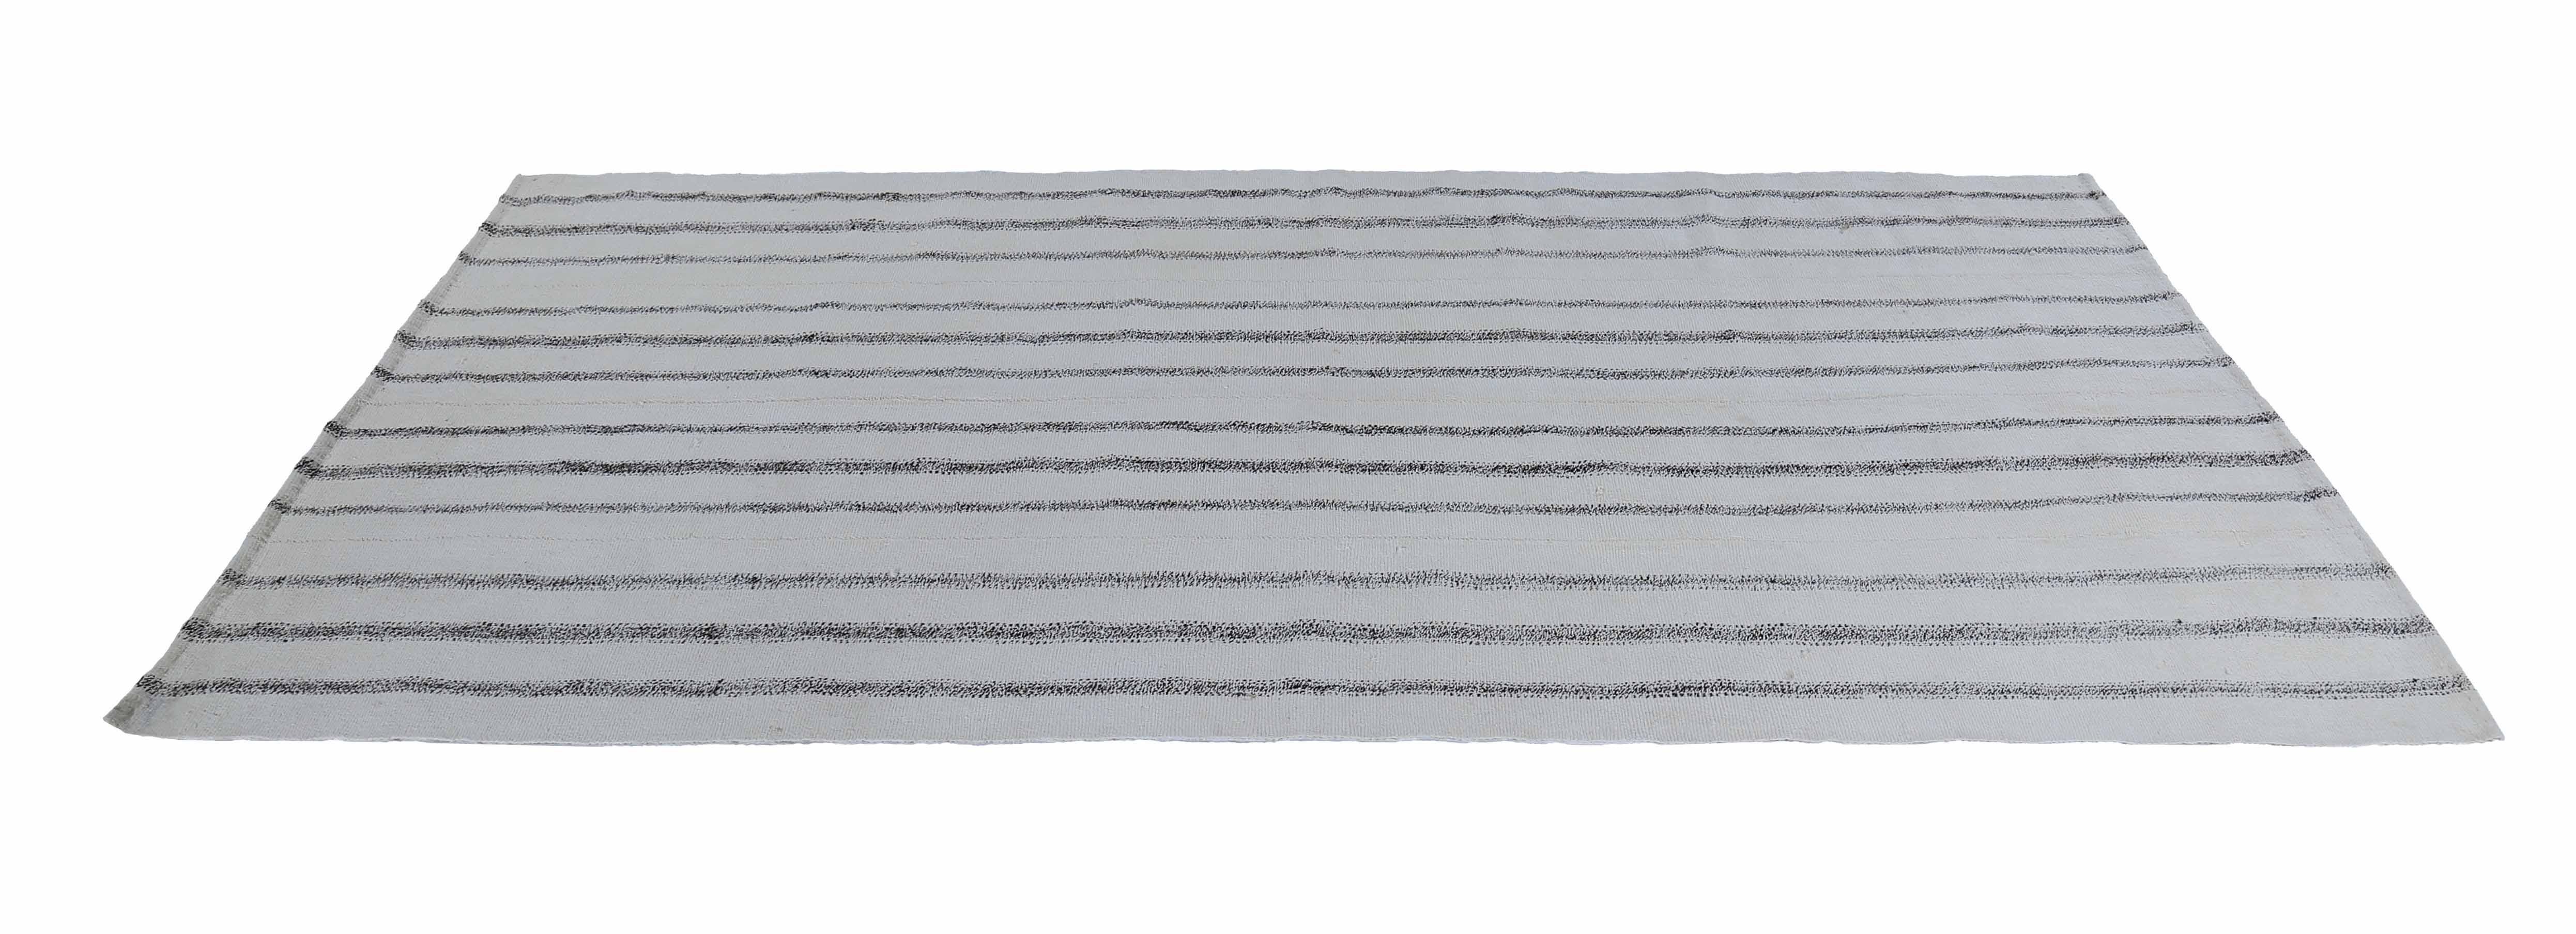 Modern Turkish rug handwoven from the finest sheep’s wool and colored with all-natural vegetable dyes that are safe for humans and pets. It’s a traditional Kilim flat-weave design featuring a white field with black pencil stripes. It’s a stunning